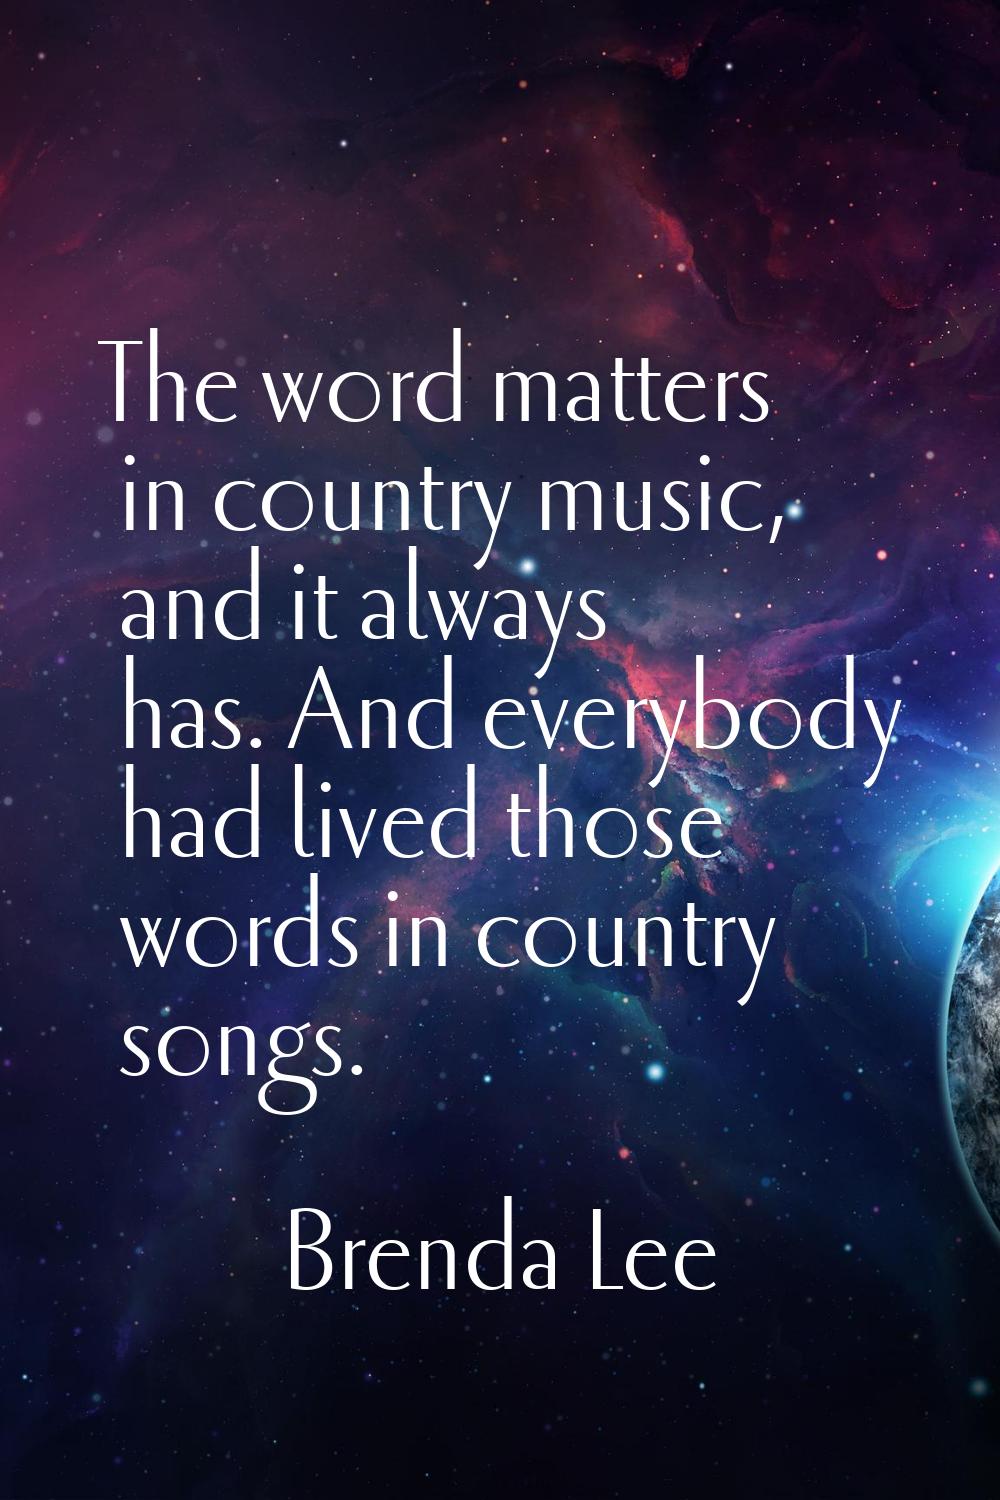 The word matters in country music, and it always has. And everybody had lived those words in countr